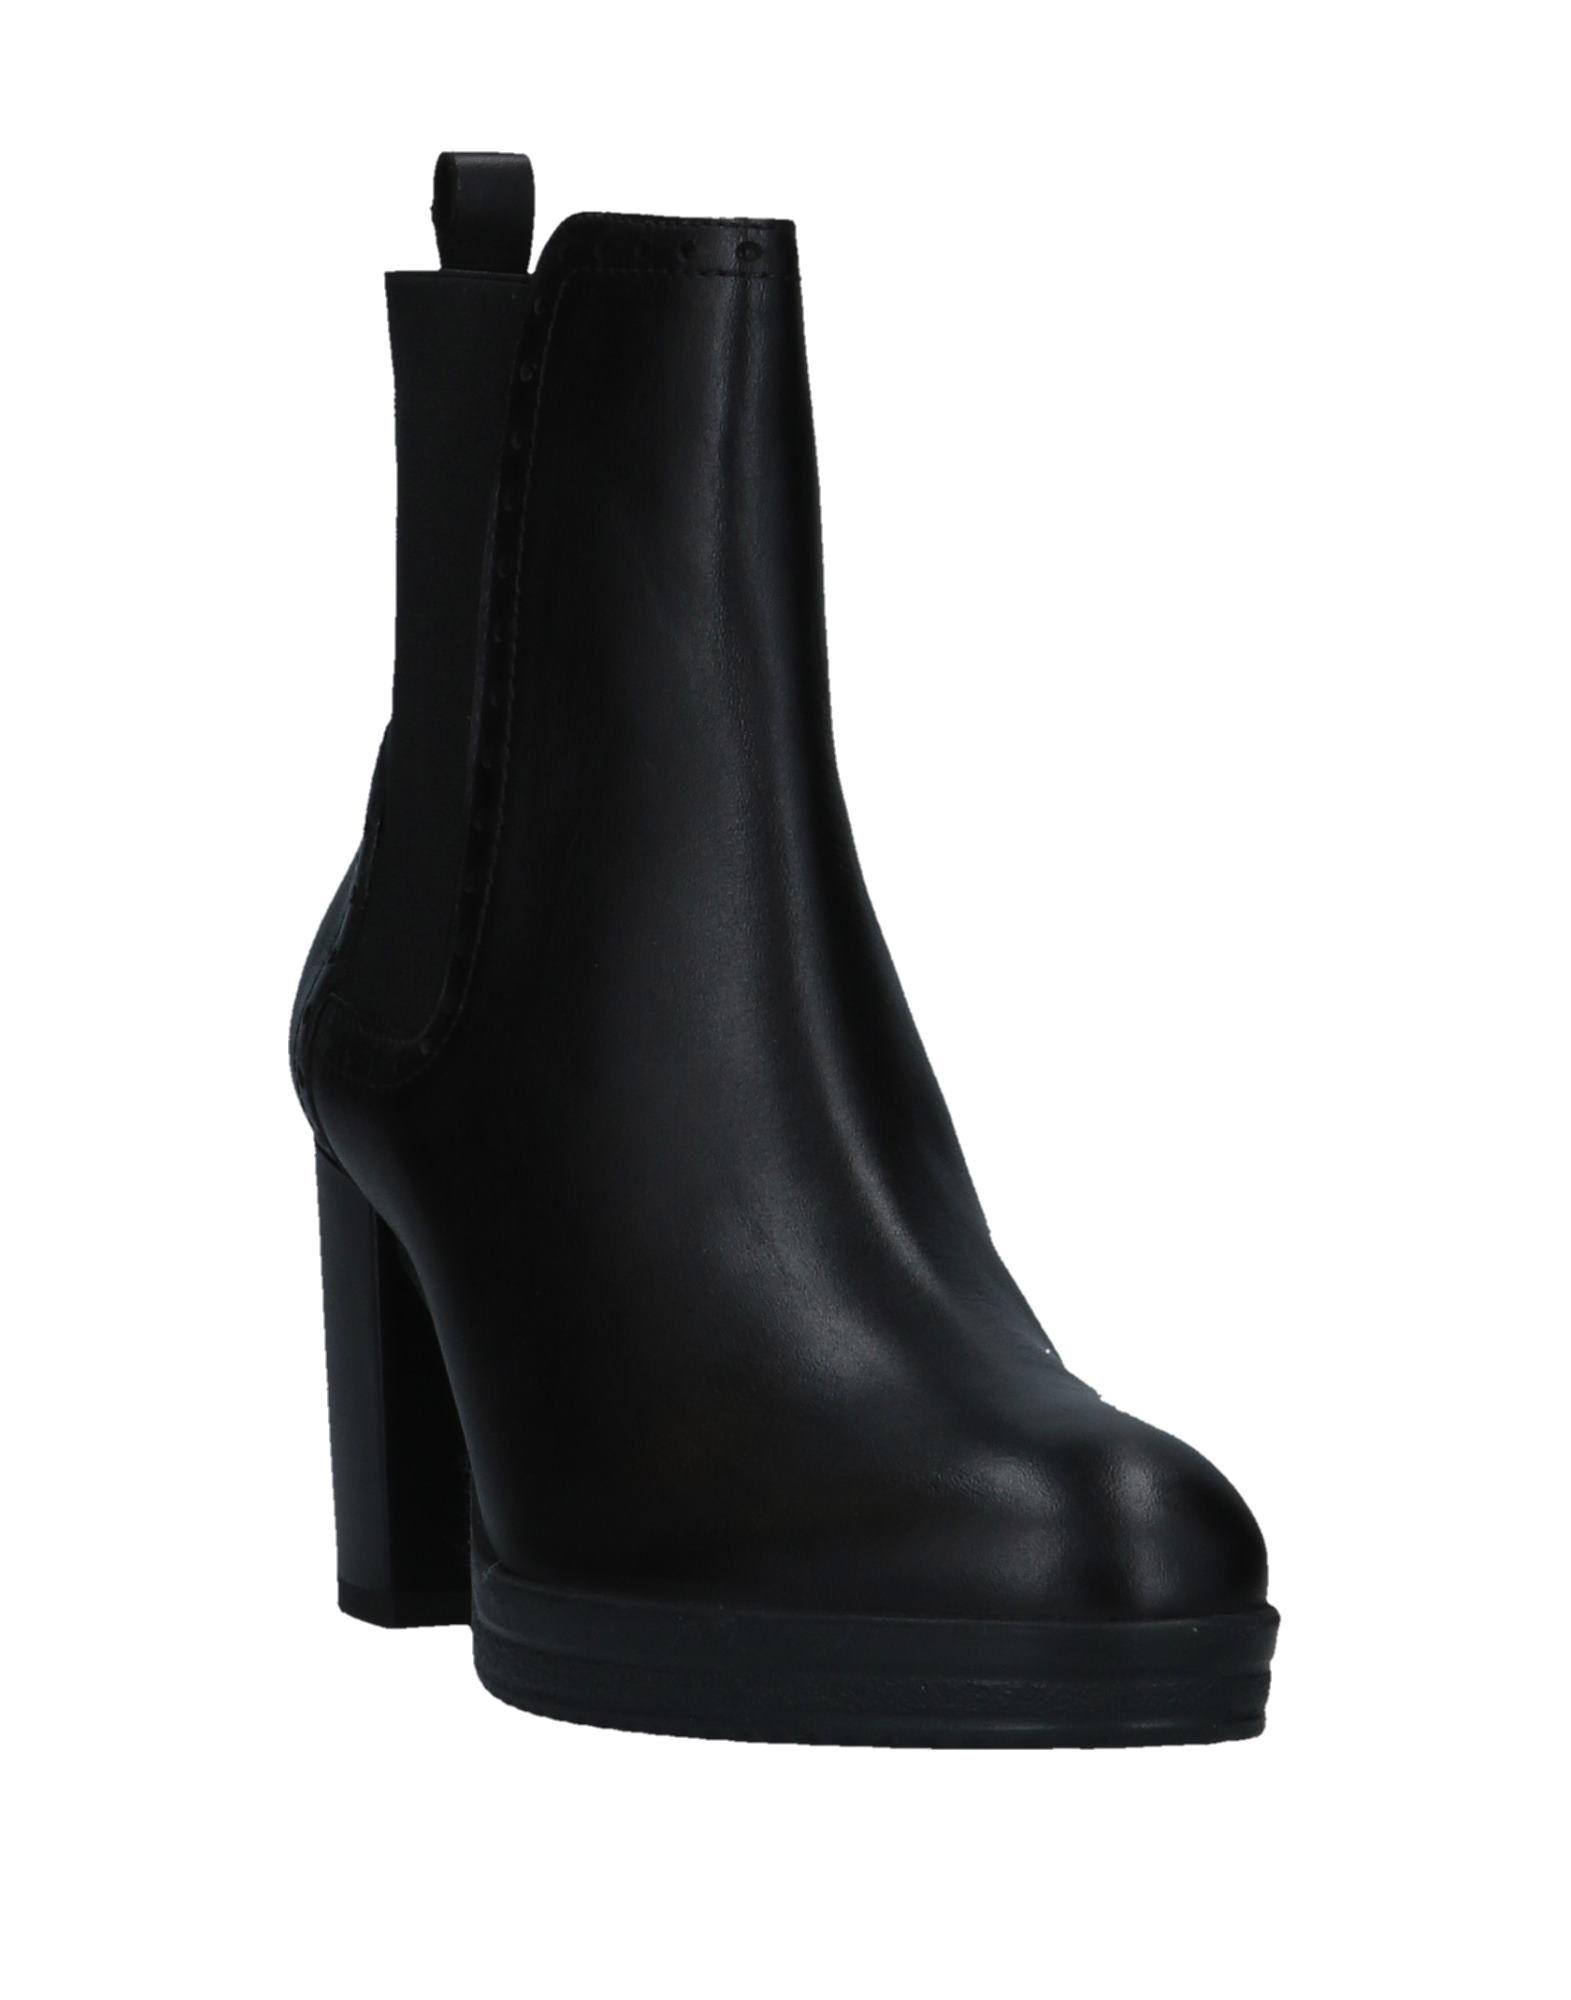 Geox Leather Ankle Boots in Black - Lyst